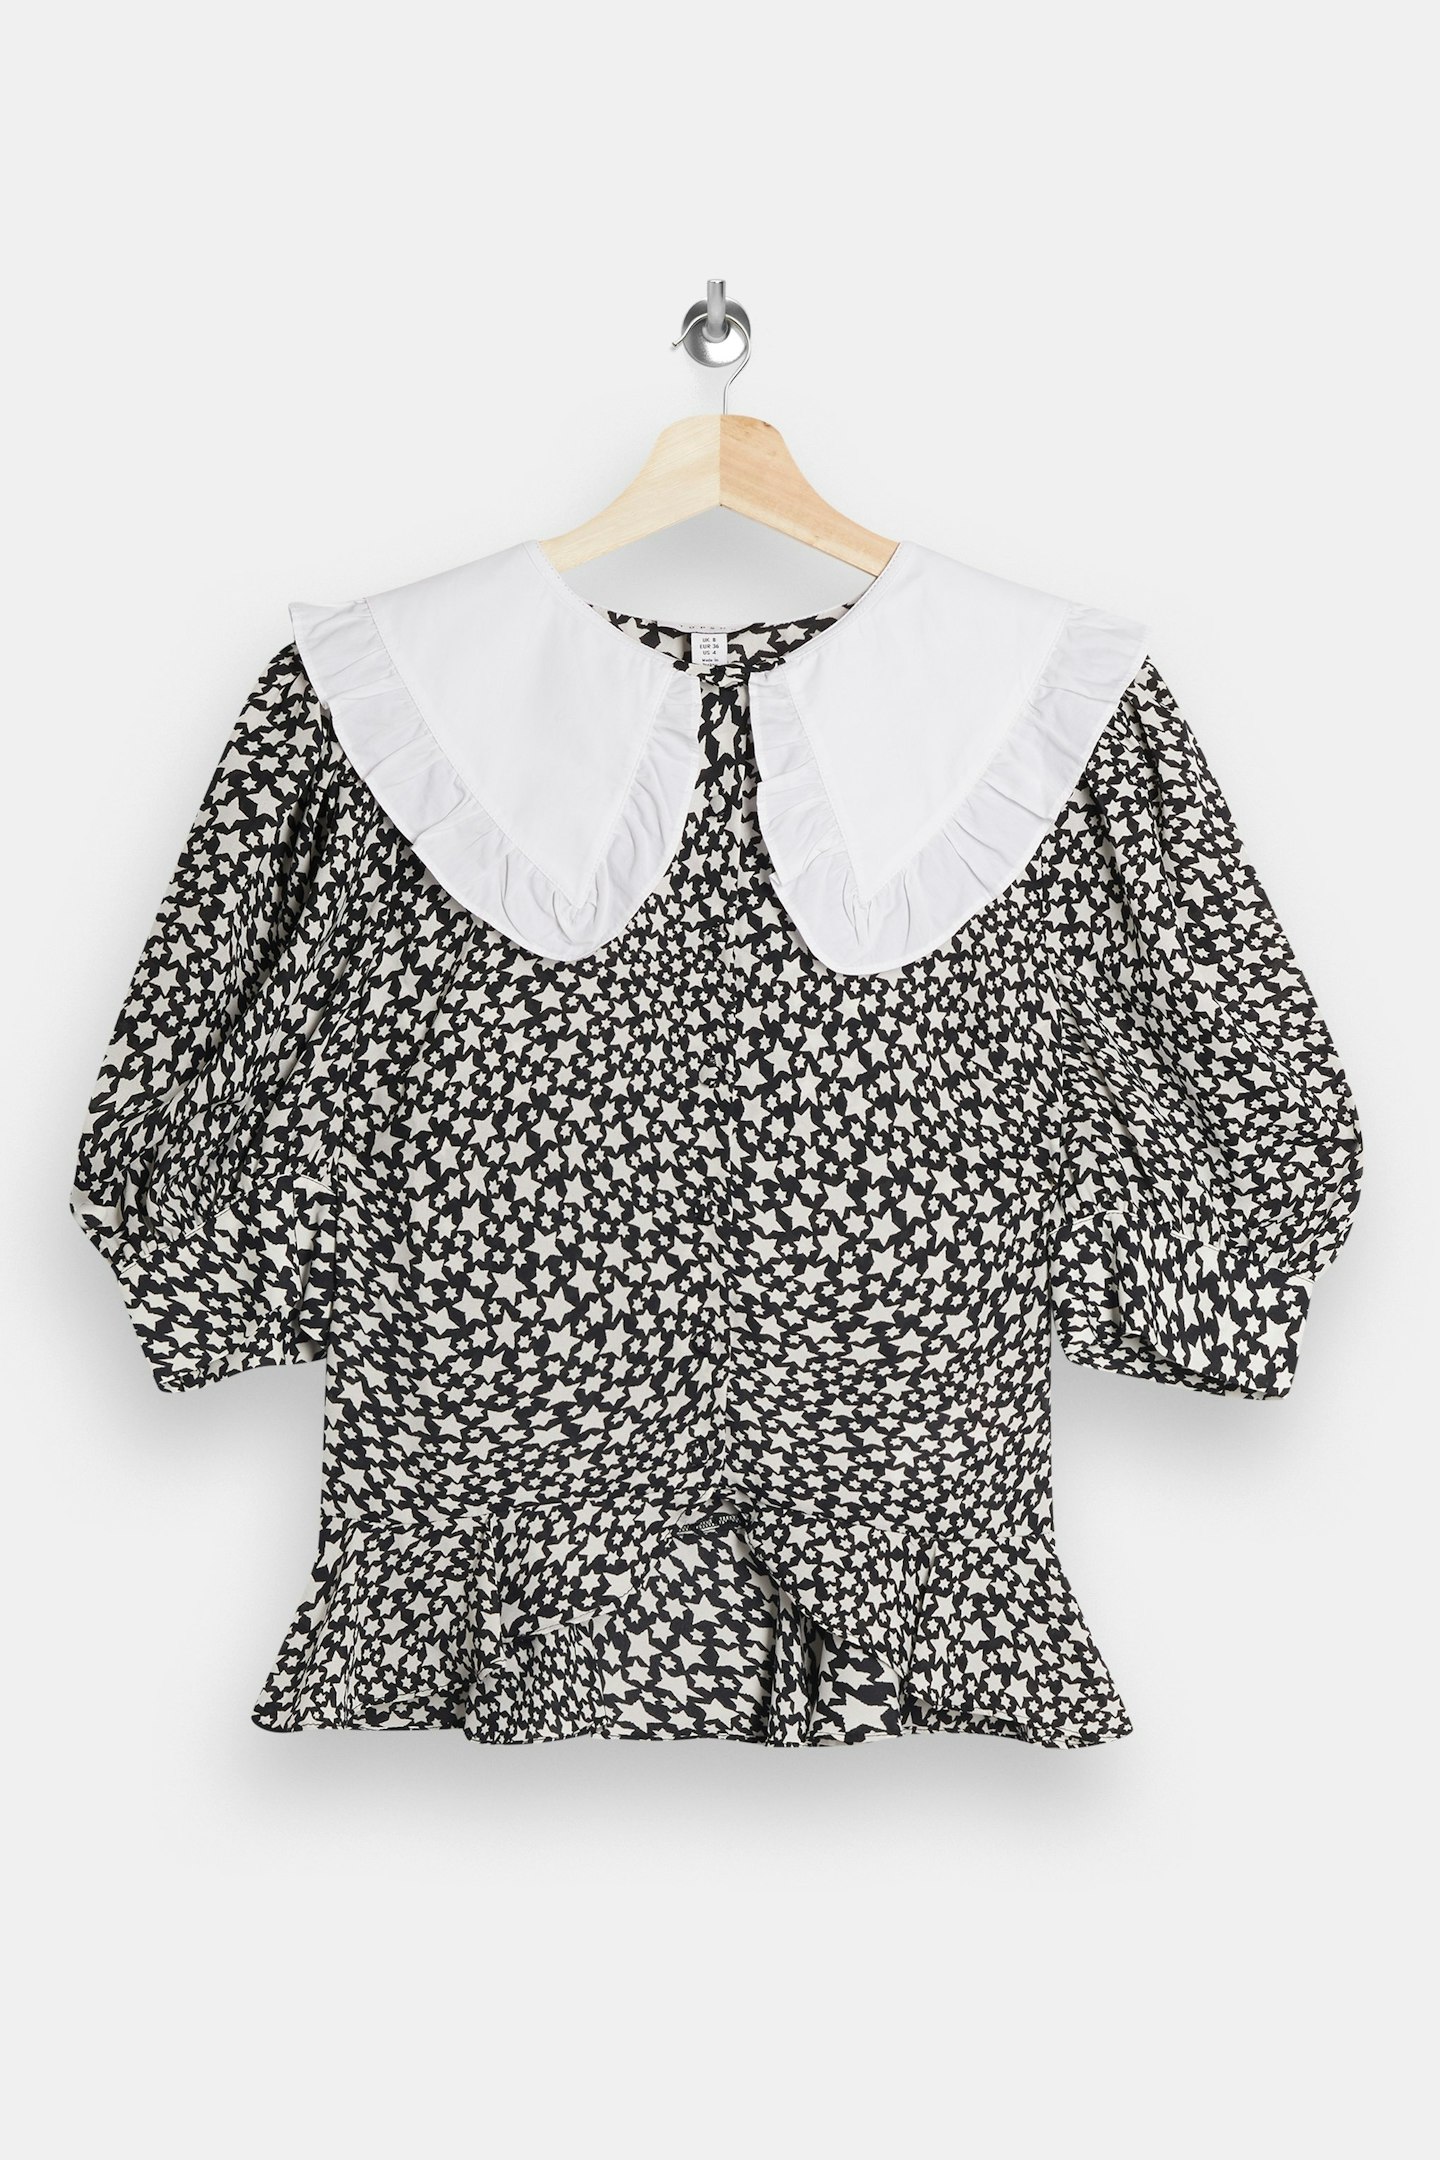 Topshop, Star Top, Was £29.99, Now £26.99